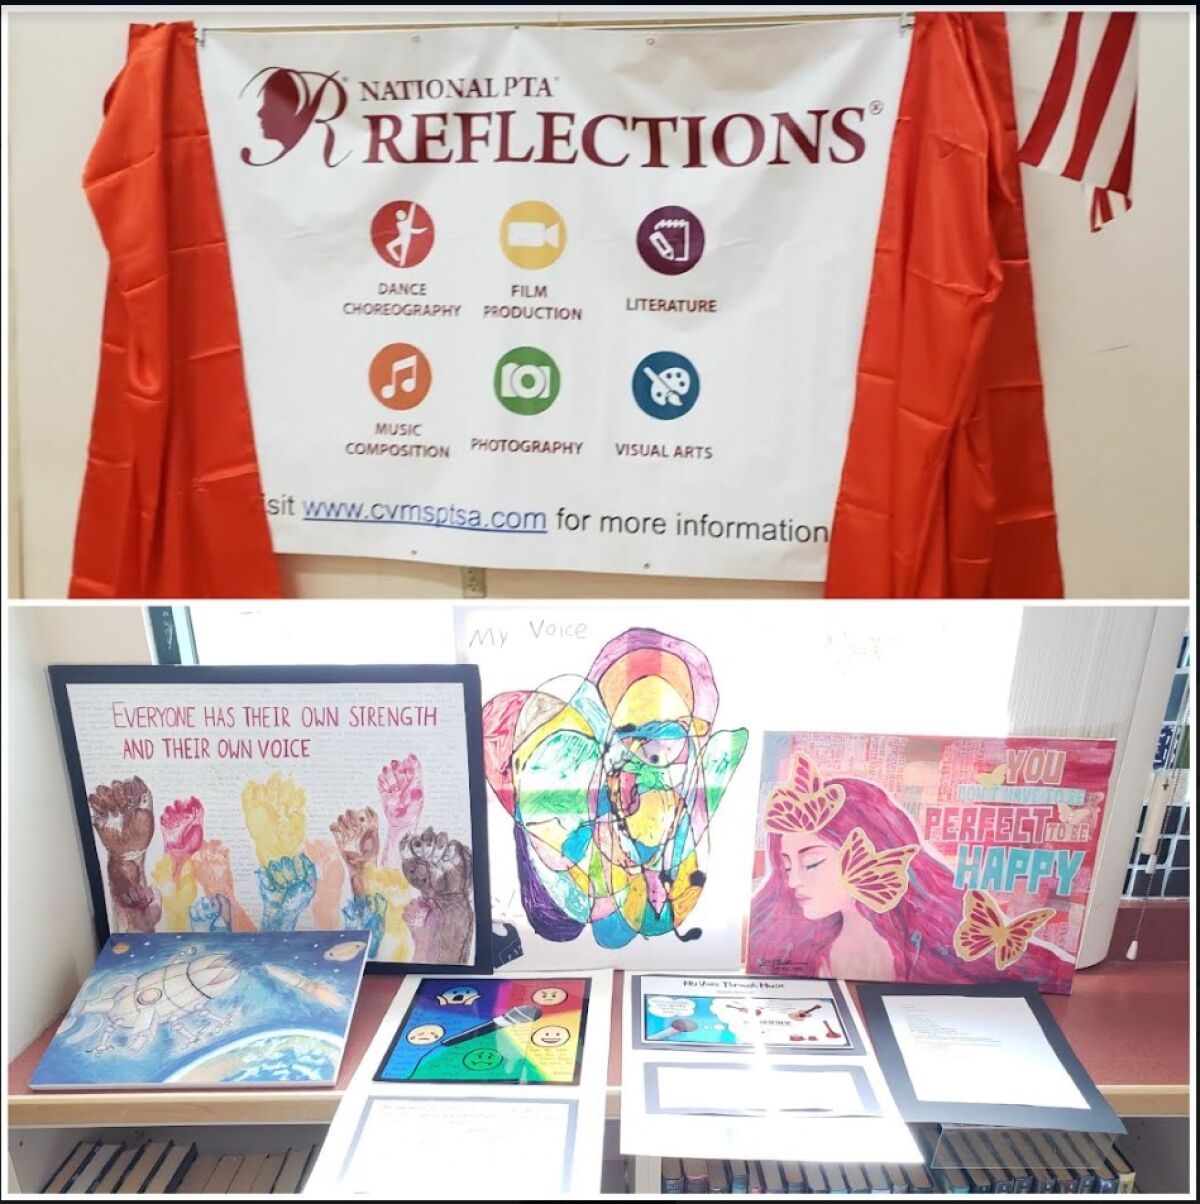 The theme at this year's Reflections event was "Show your voice".